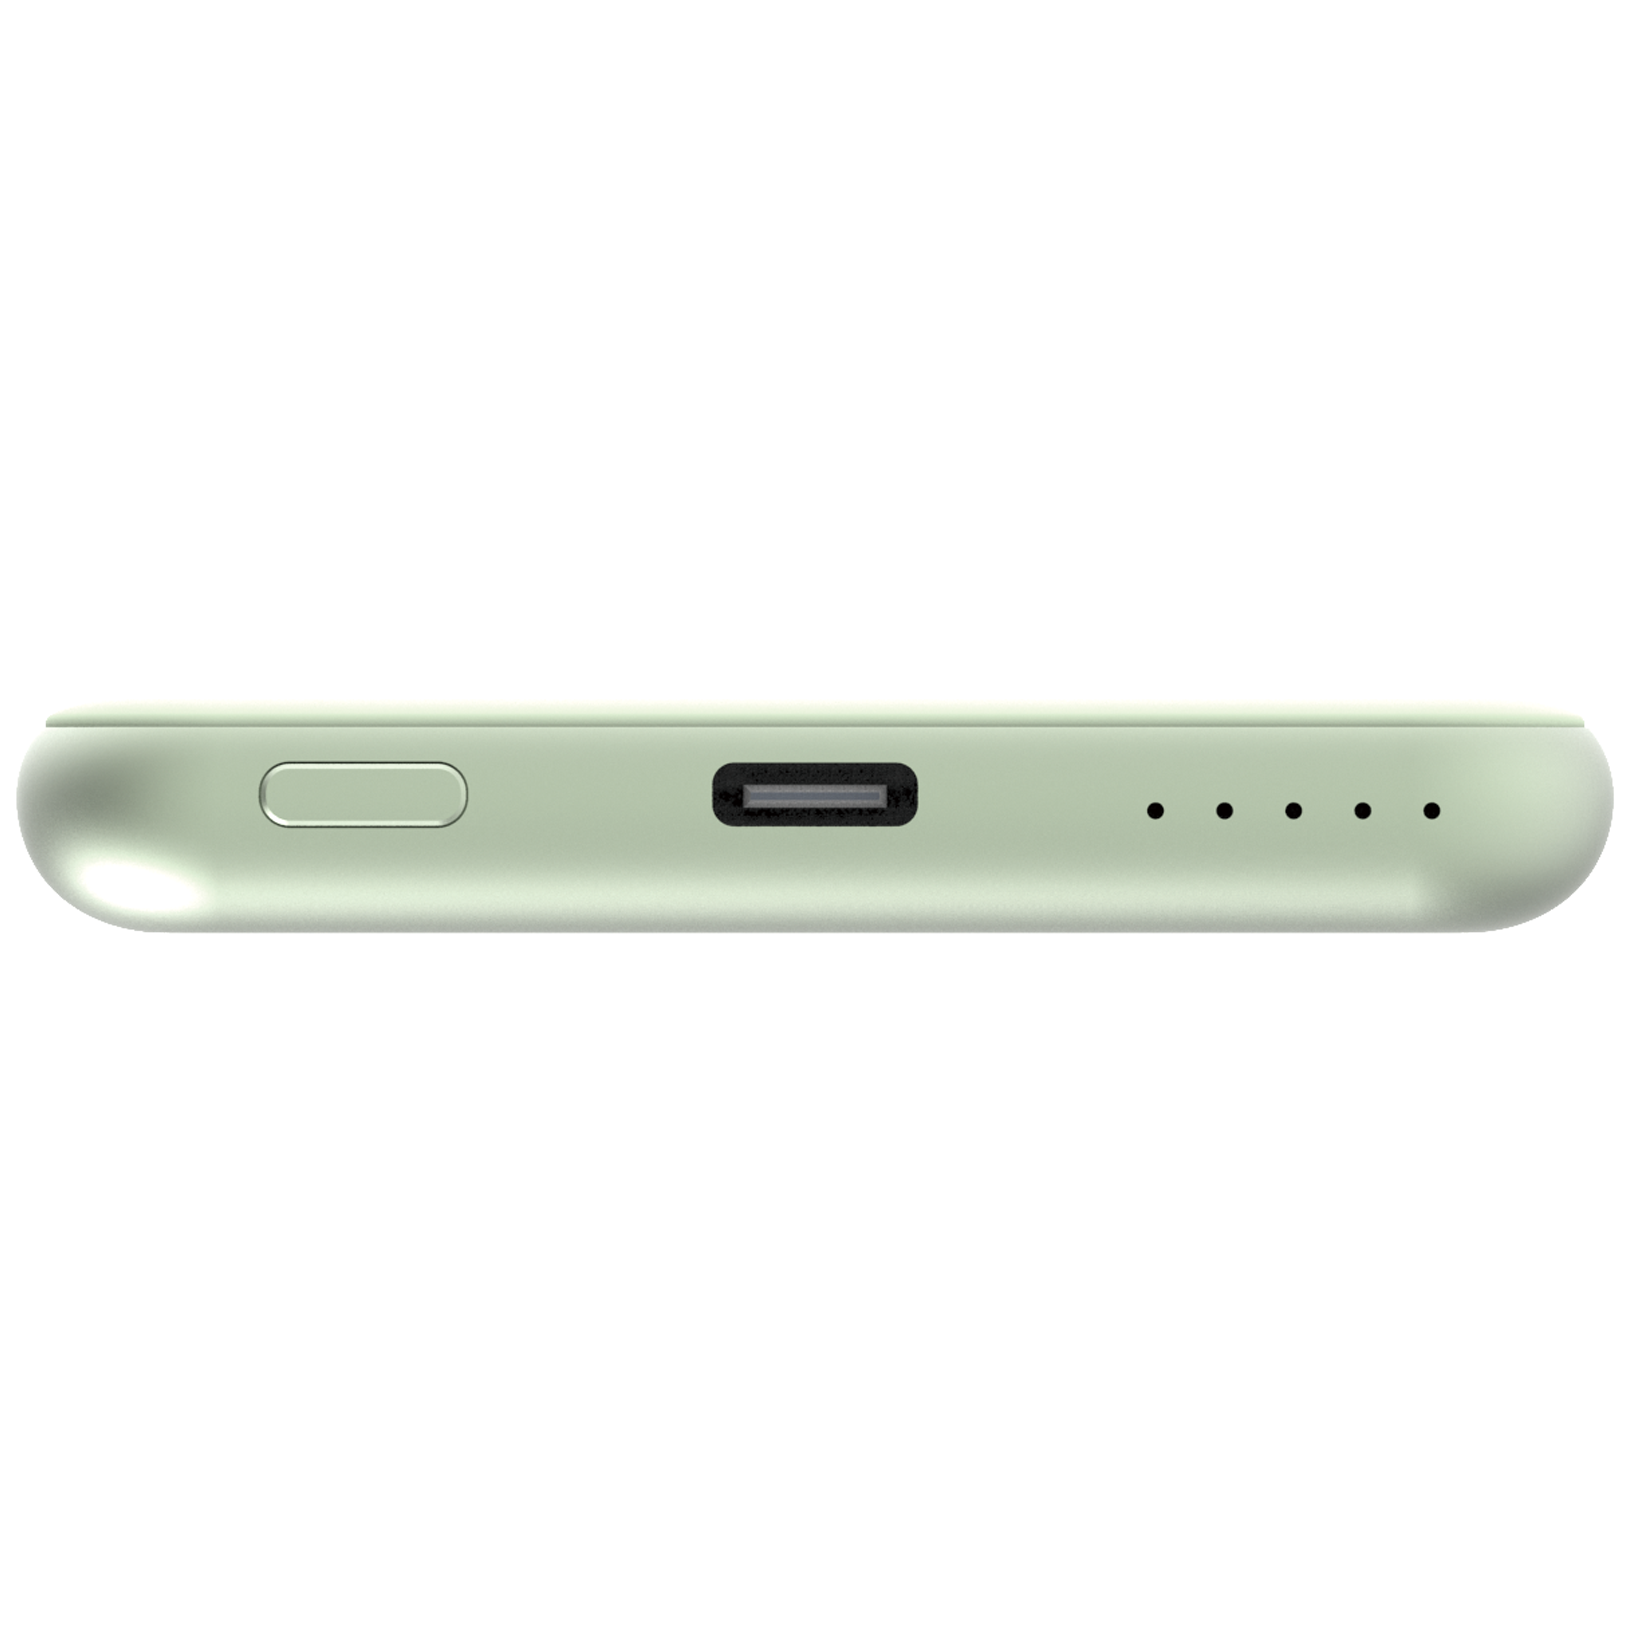 Charge 'n' Go Magnetic Wireless Power Bank 5000mAh Verde